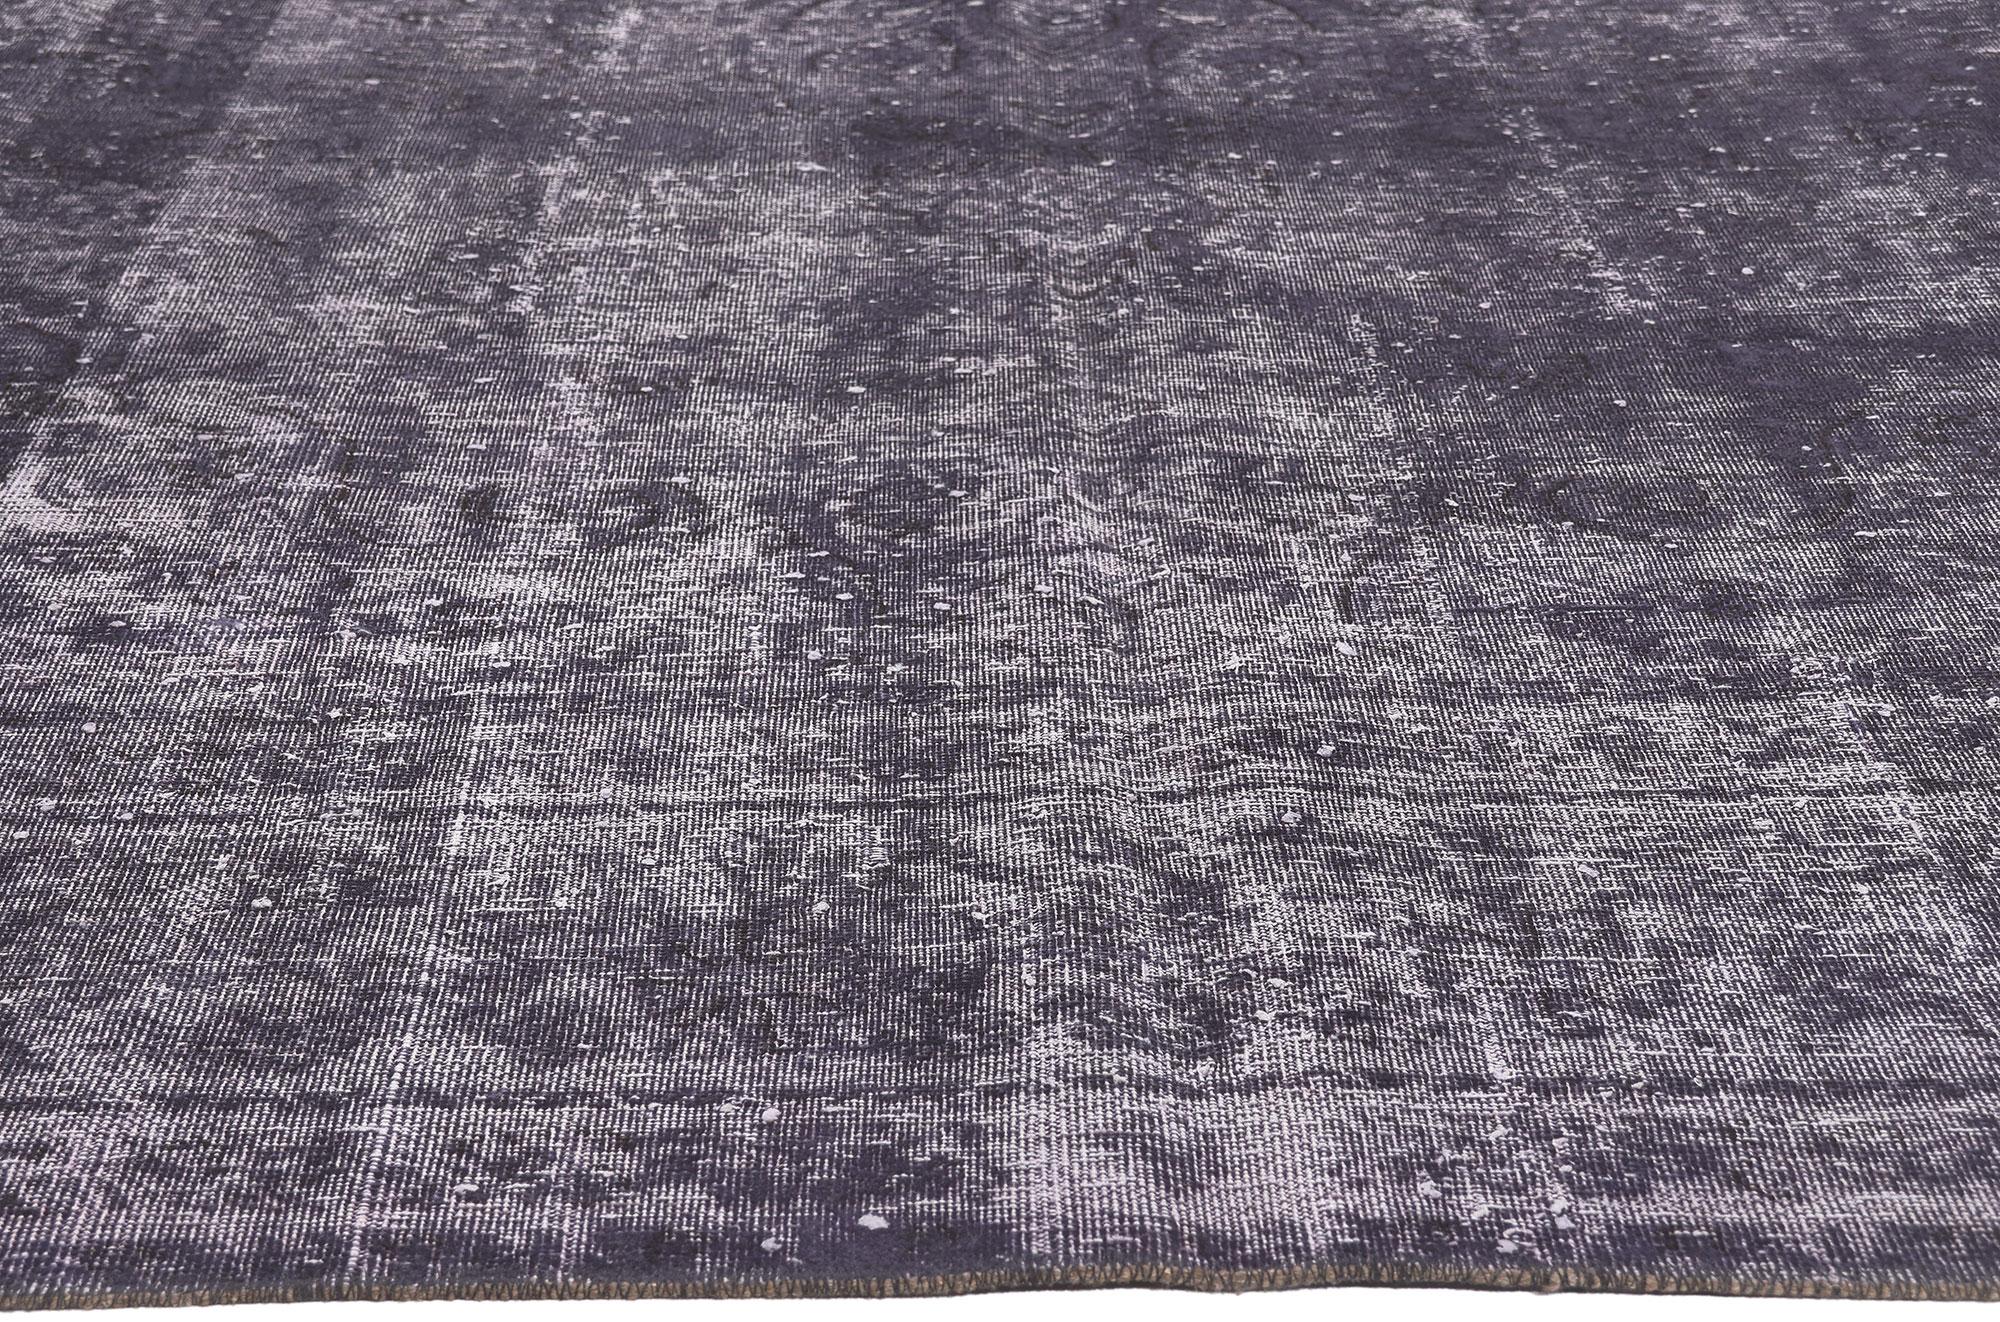 Hand-Knotted Vintage Turkish Aubergine Overdyed Rug, Industrial Chic Meets Dark & Moody For Sale